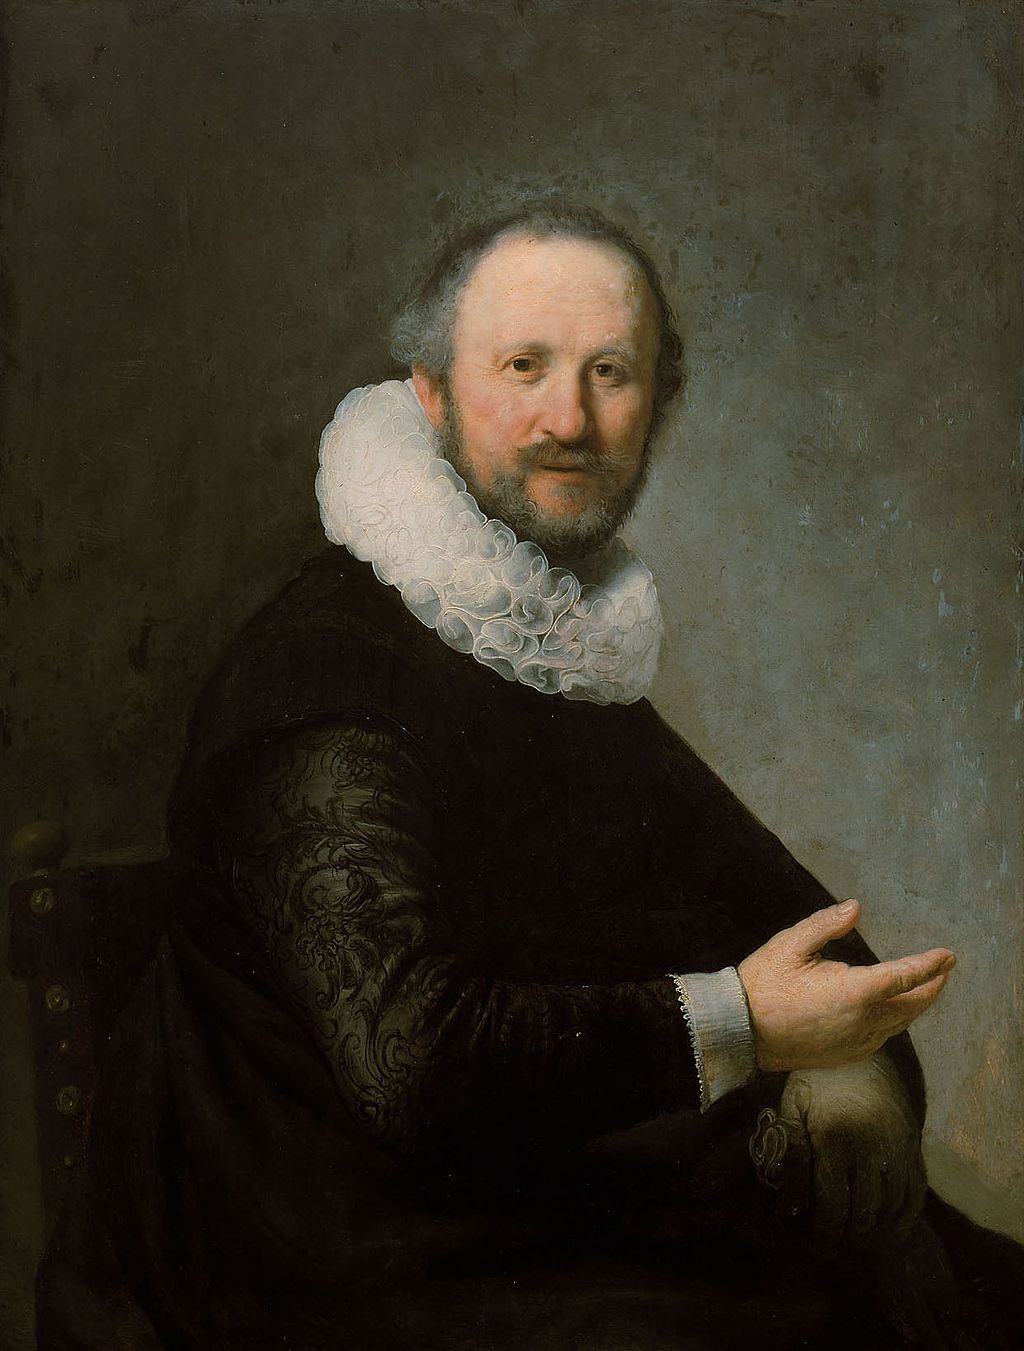 Portrait of a Man Painting by Rembrandt Oil on Canvas Reproduction by blue surf art